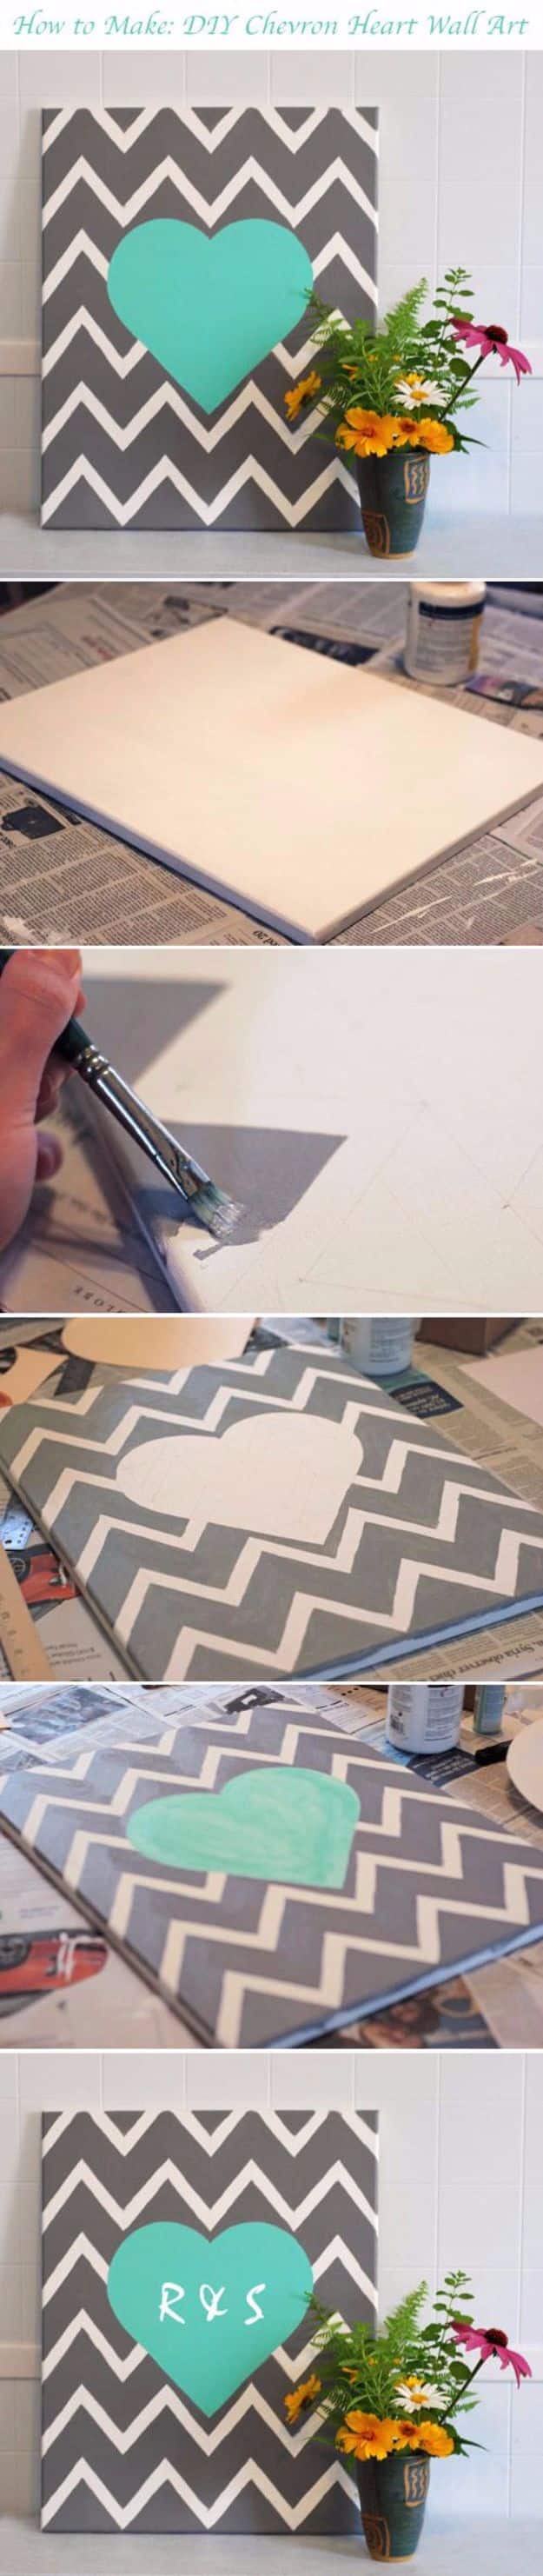 DIY Canvas Painting Ideas - DIY Chevron Heart - Cool and Easy Wall Art Ideas You Can Make On A Budget #painting #diyart #diygifts